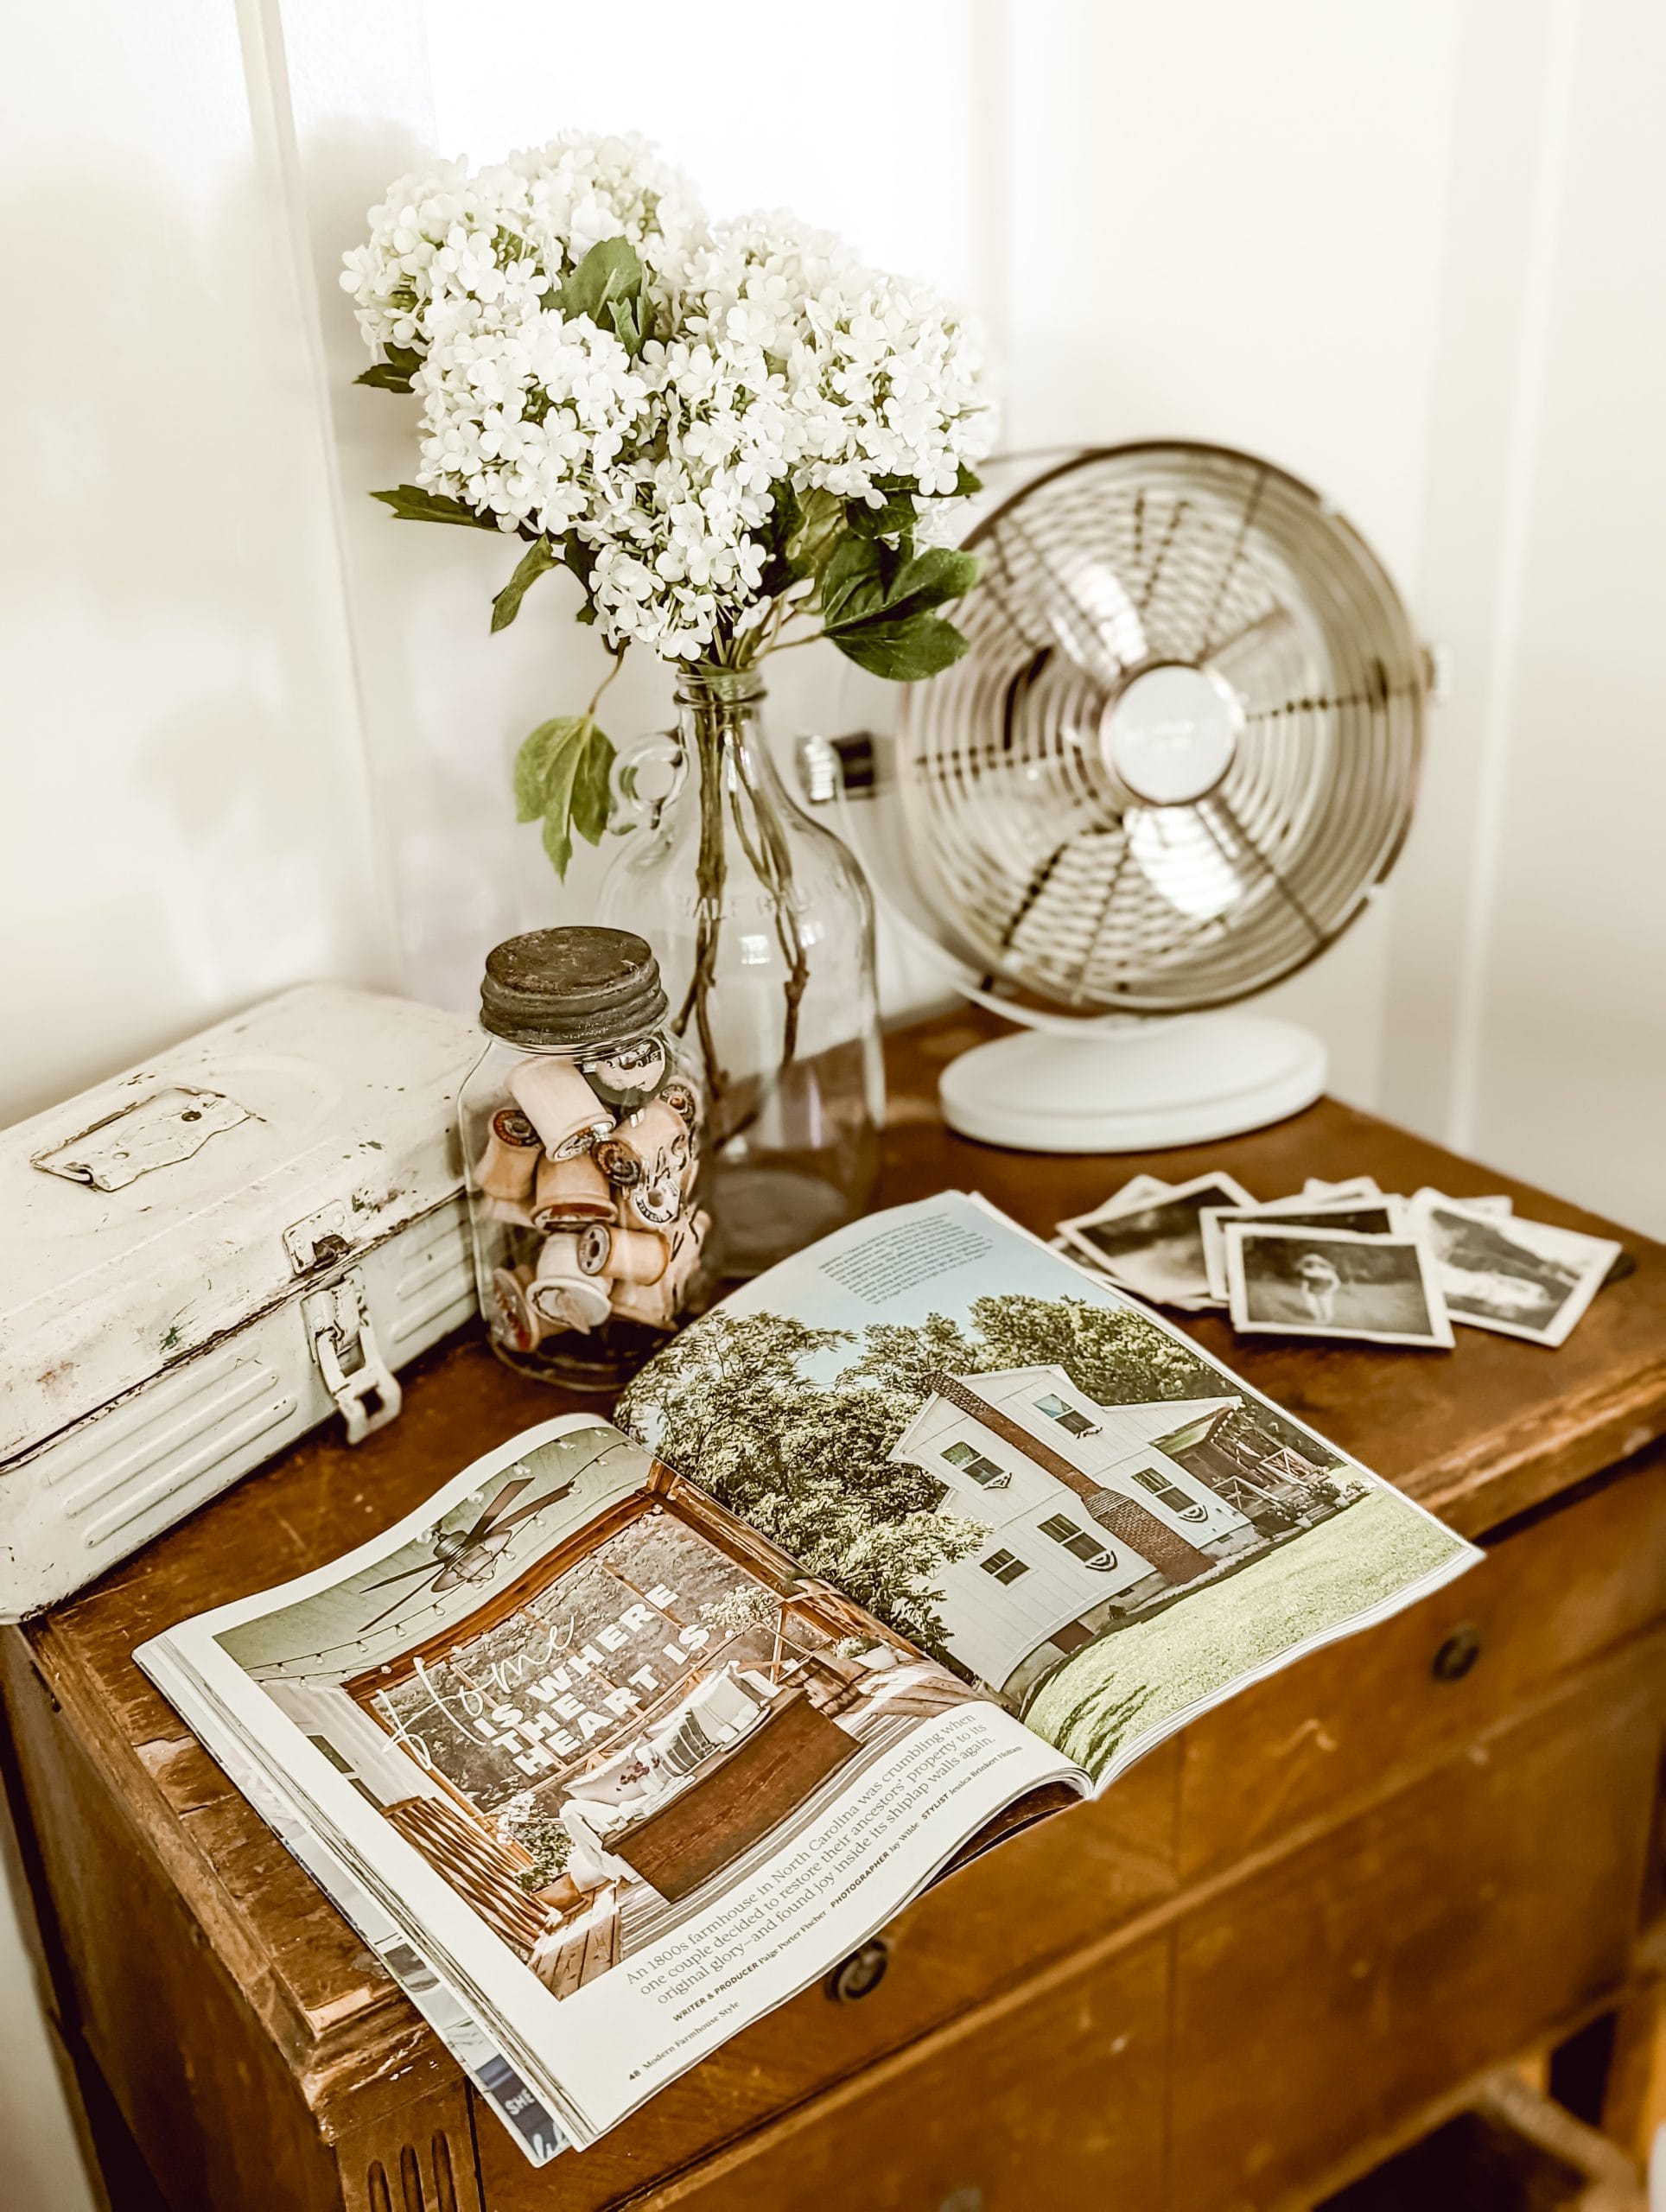 magazine, old black and white photographs, and other vintage decor styled on a wooden side table